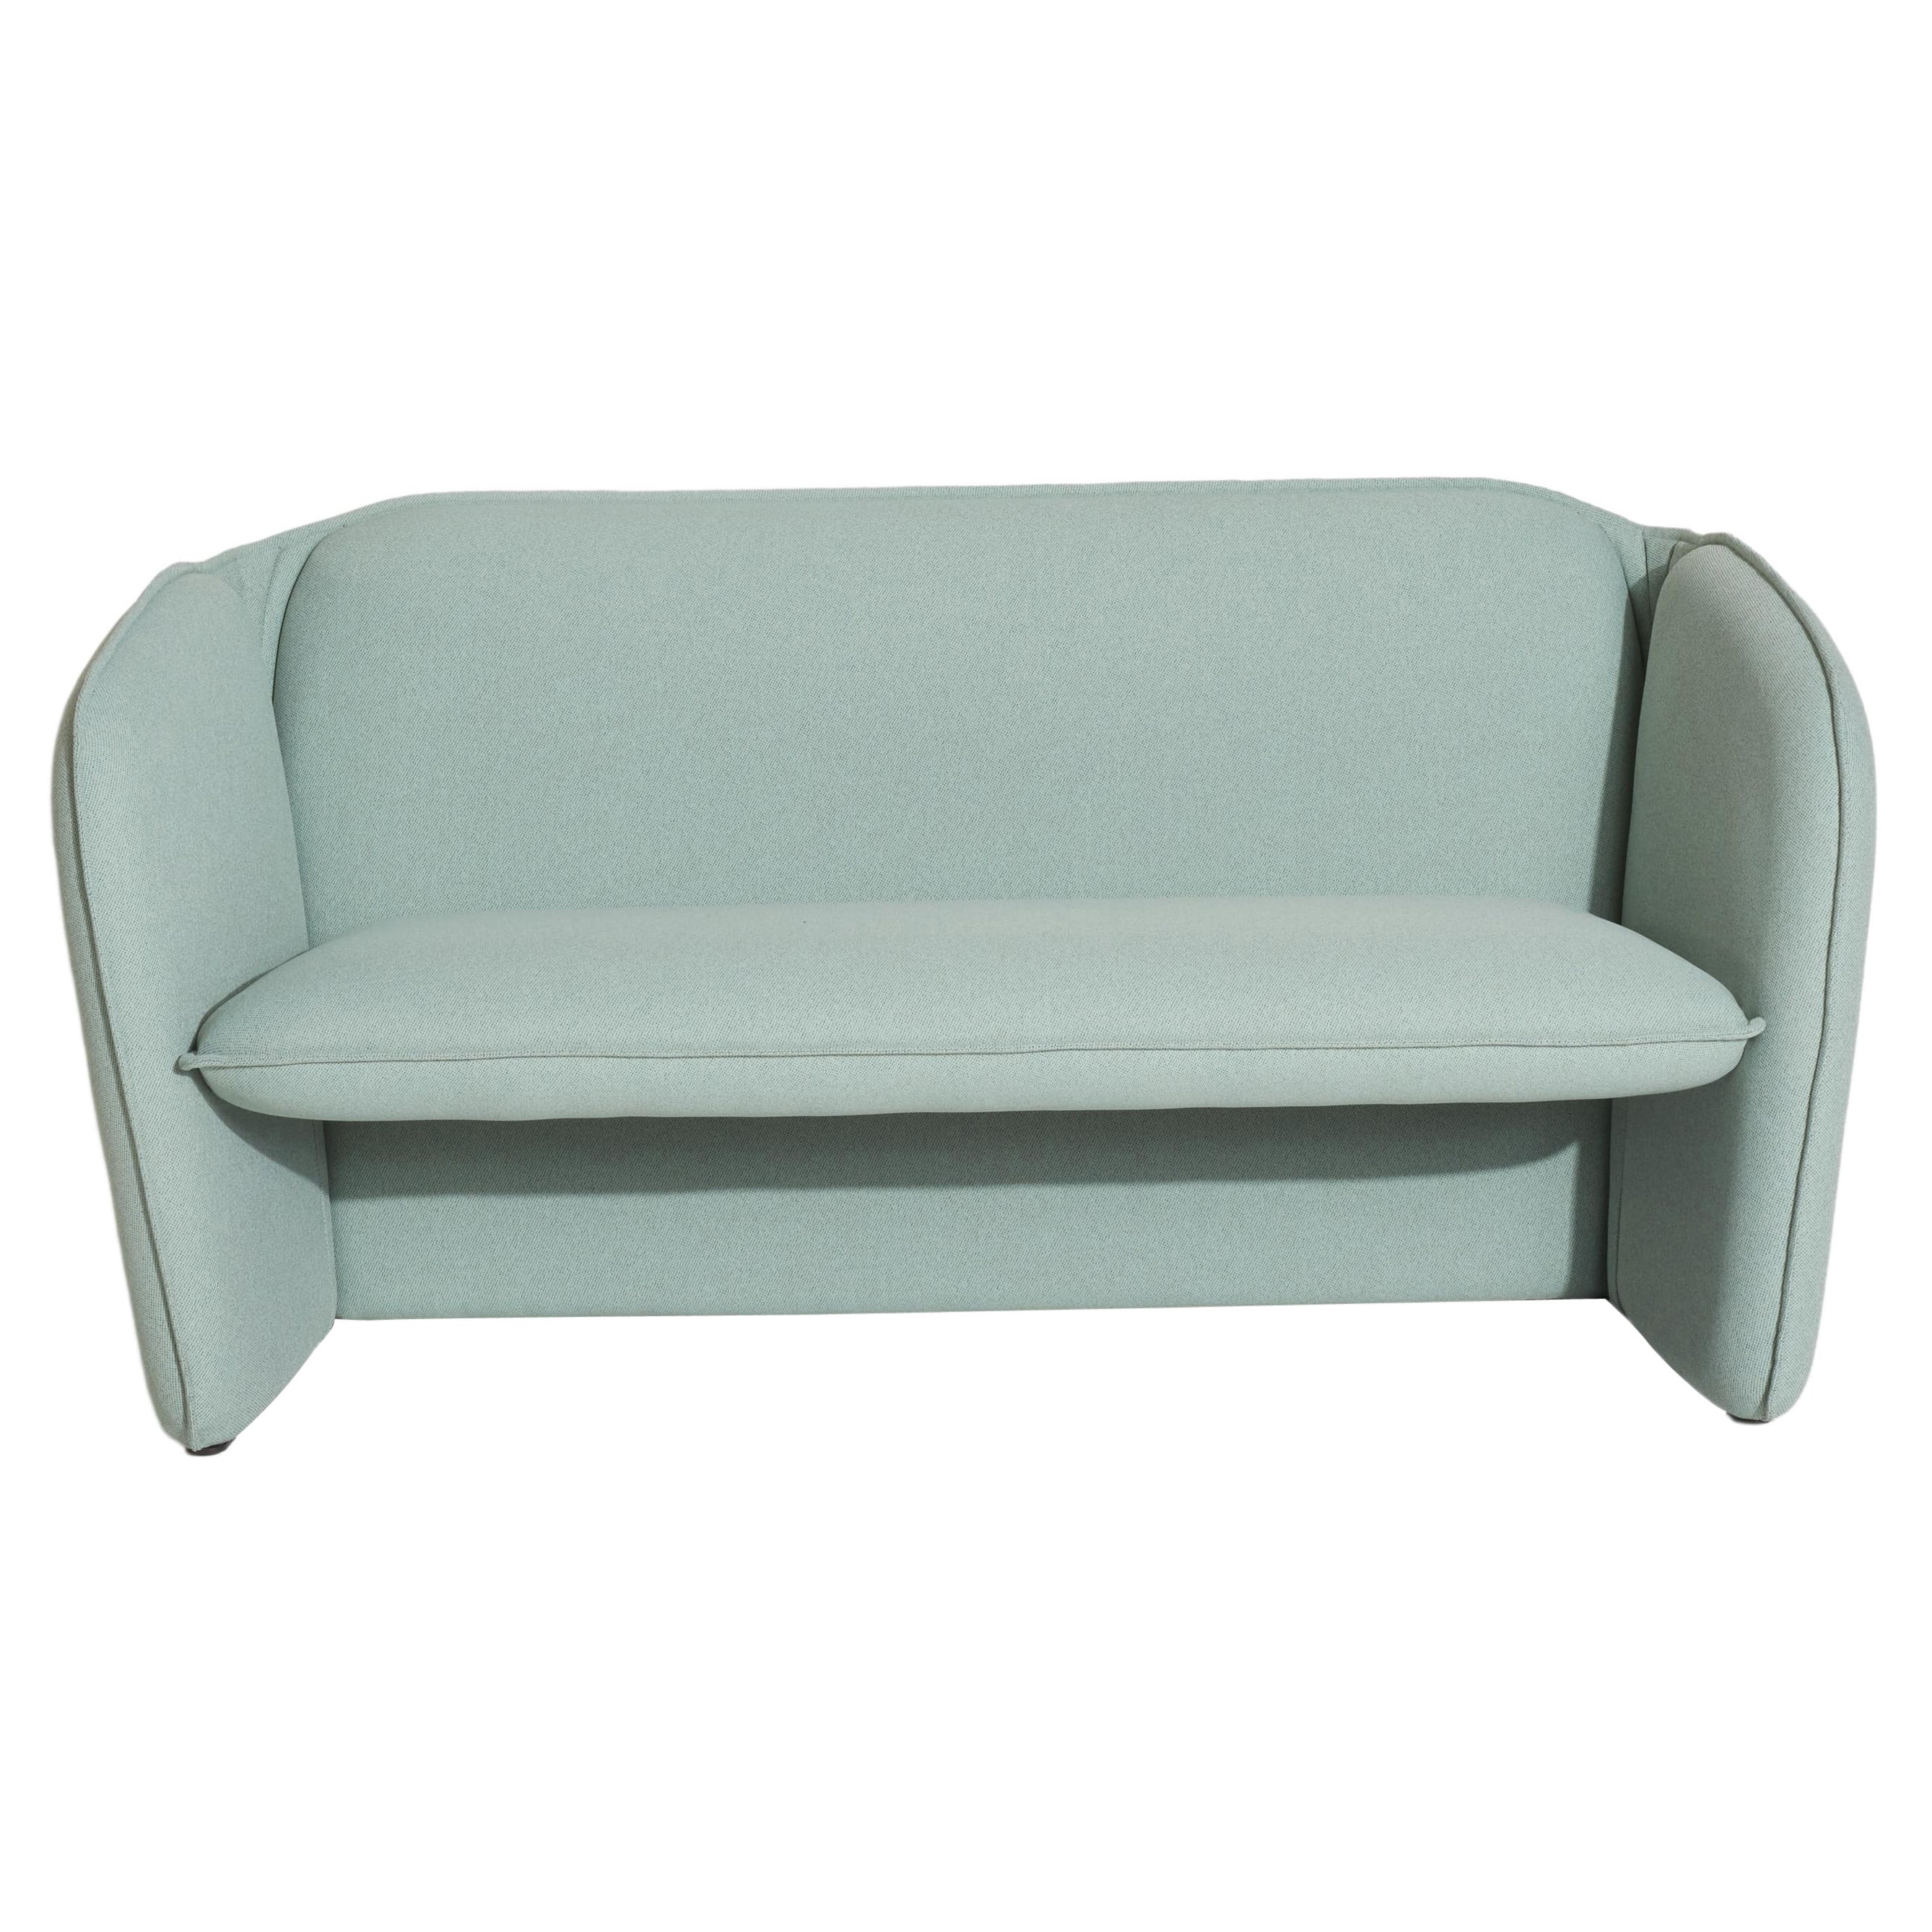 Petite Friture Lily Sofa in Light Blue by Färg & Blanche, 2022